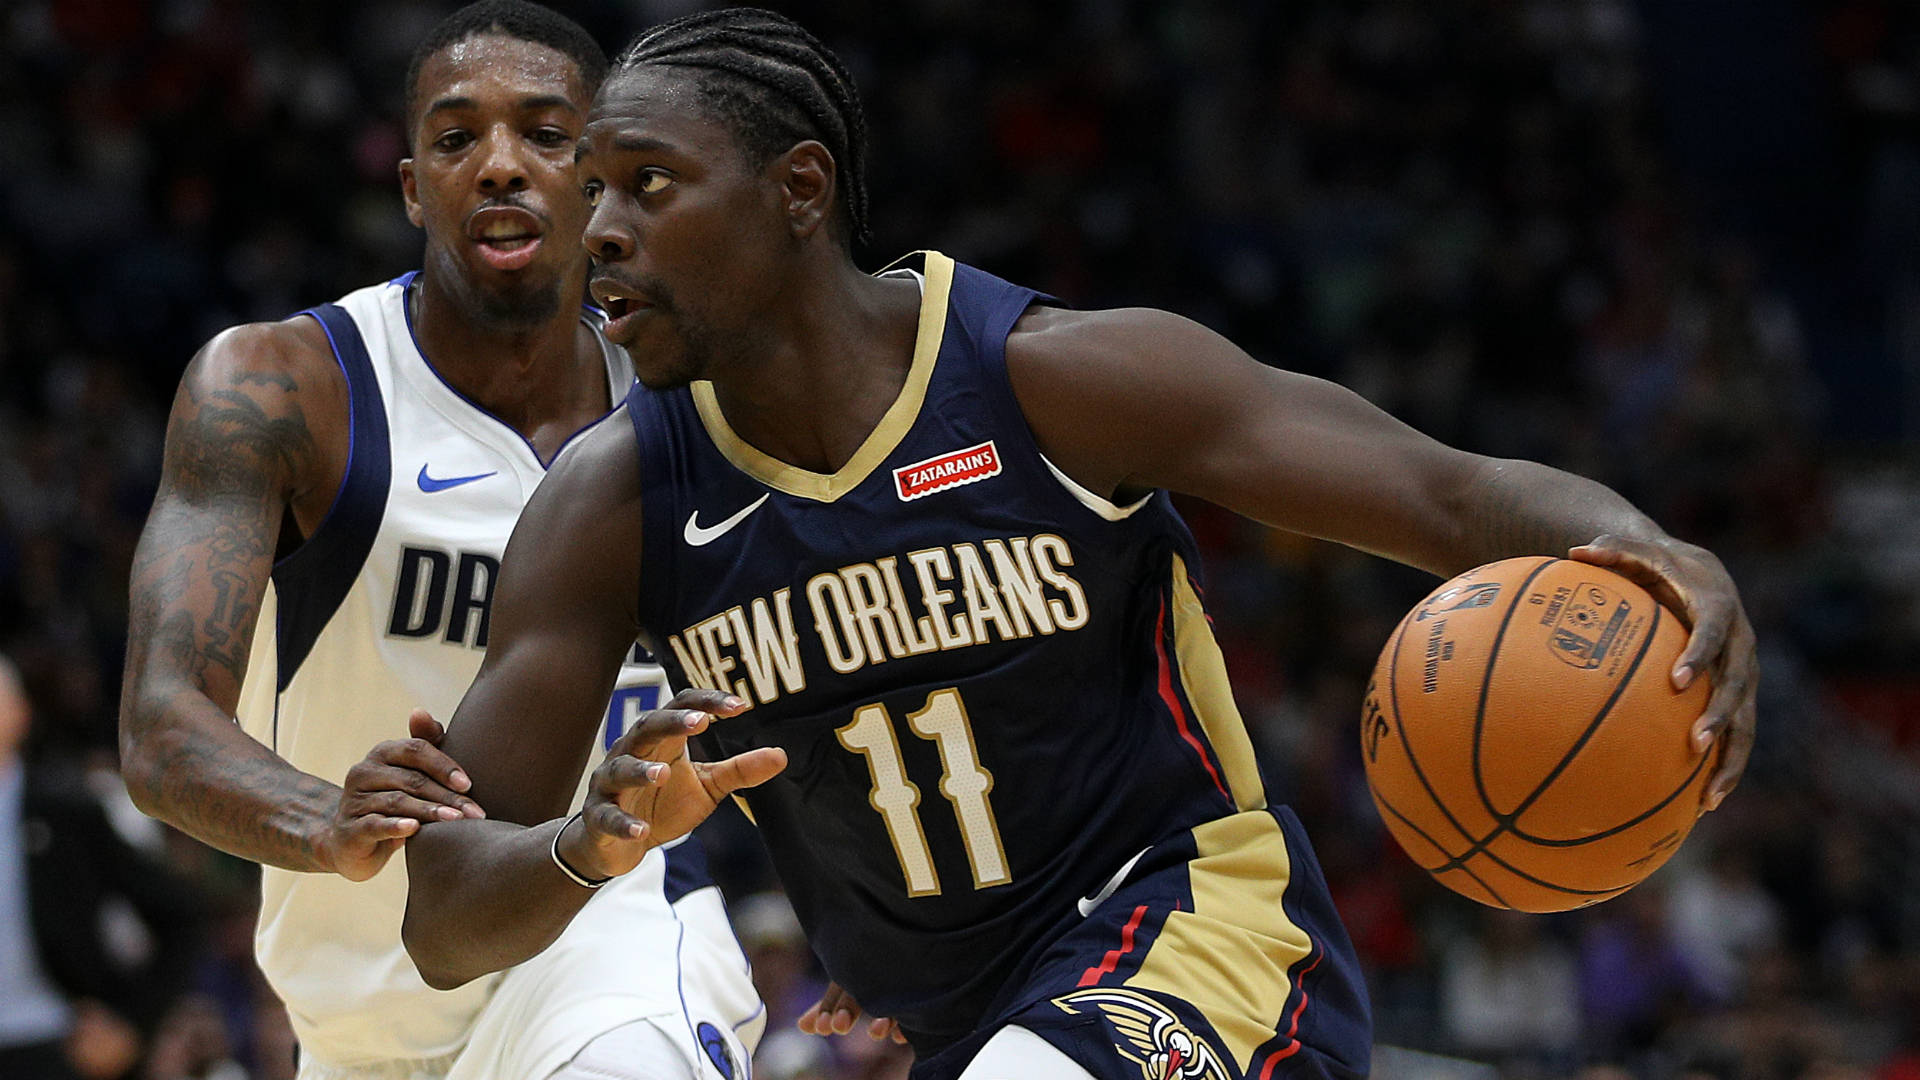 Iconic Nba Player, Jrue Holiday In Action Background